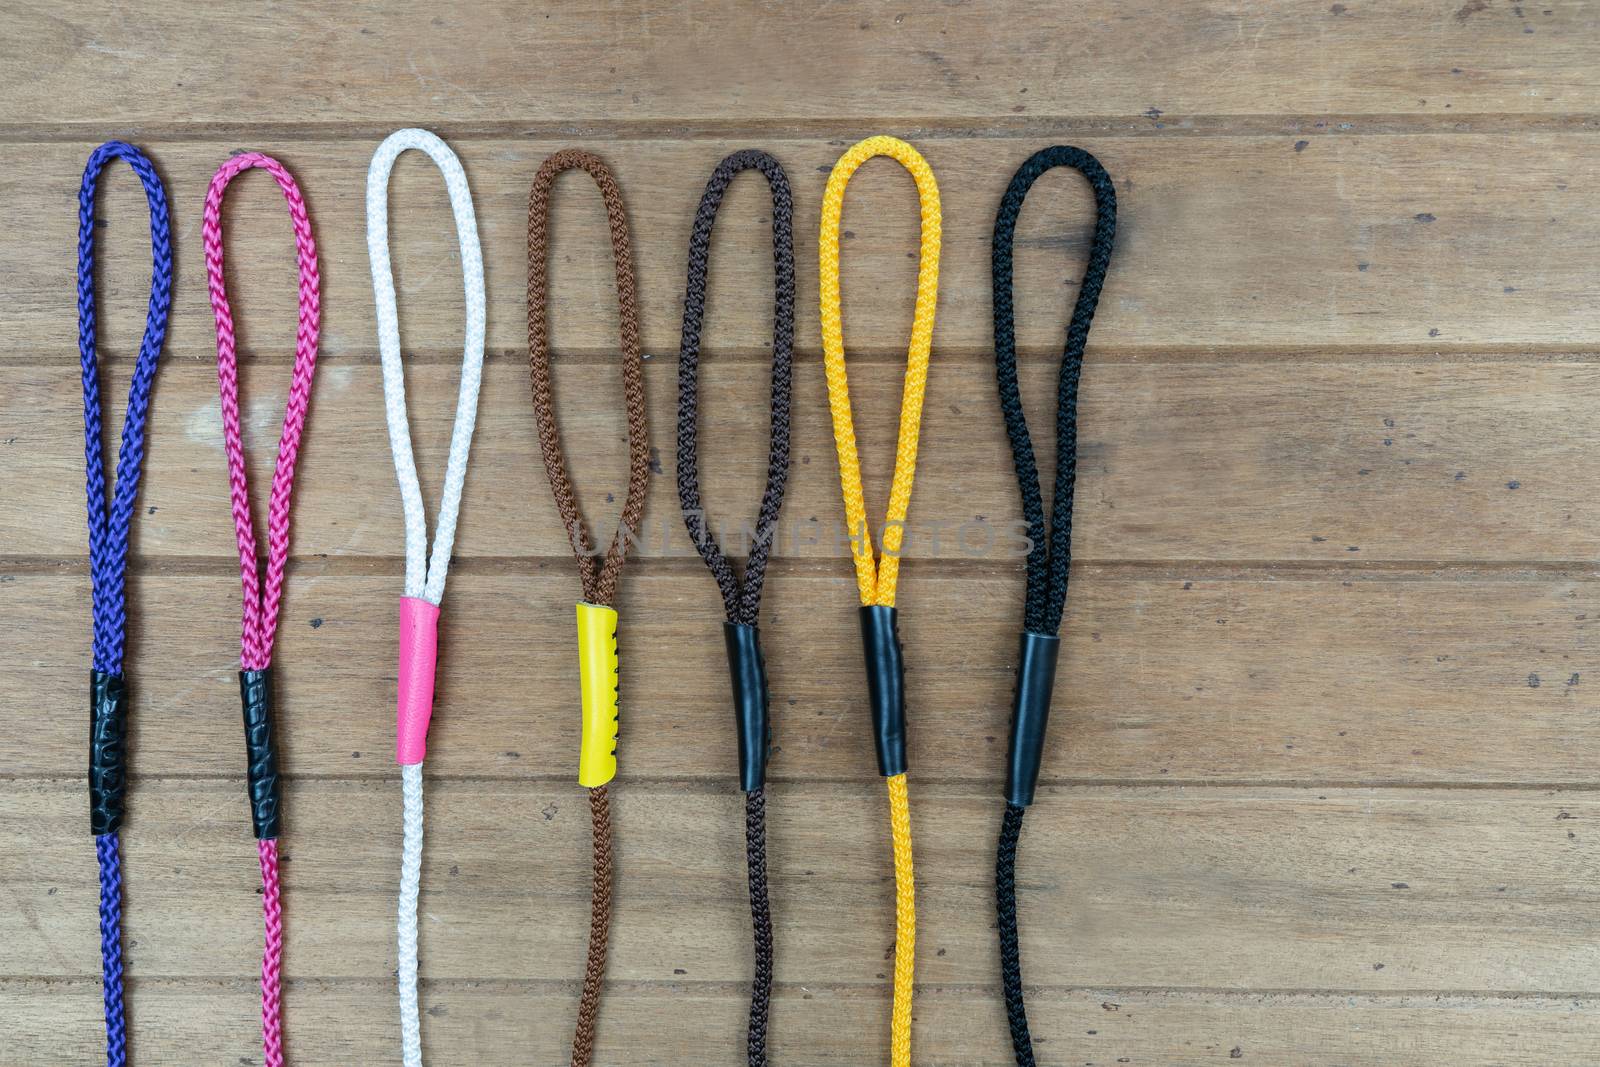 Pet leashes on wooden background.  Pet accessories concept